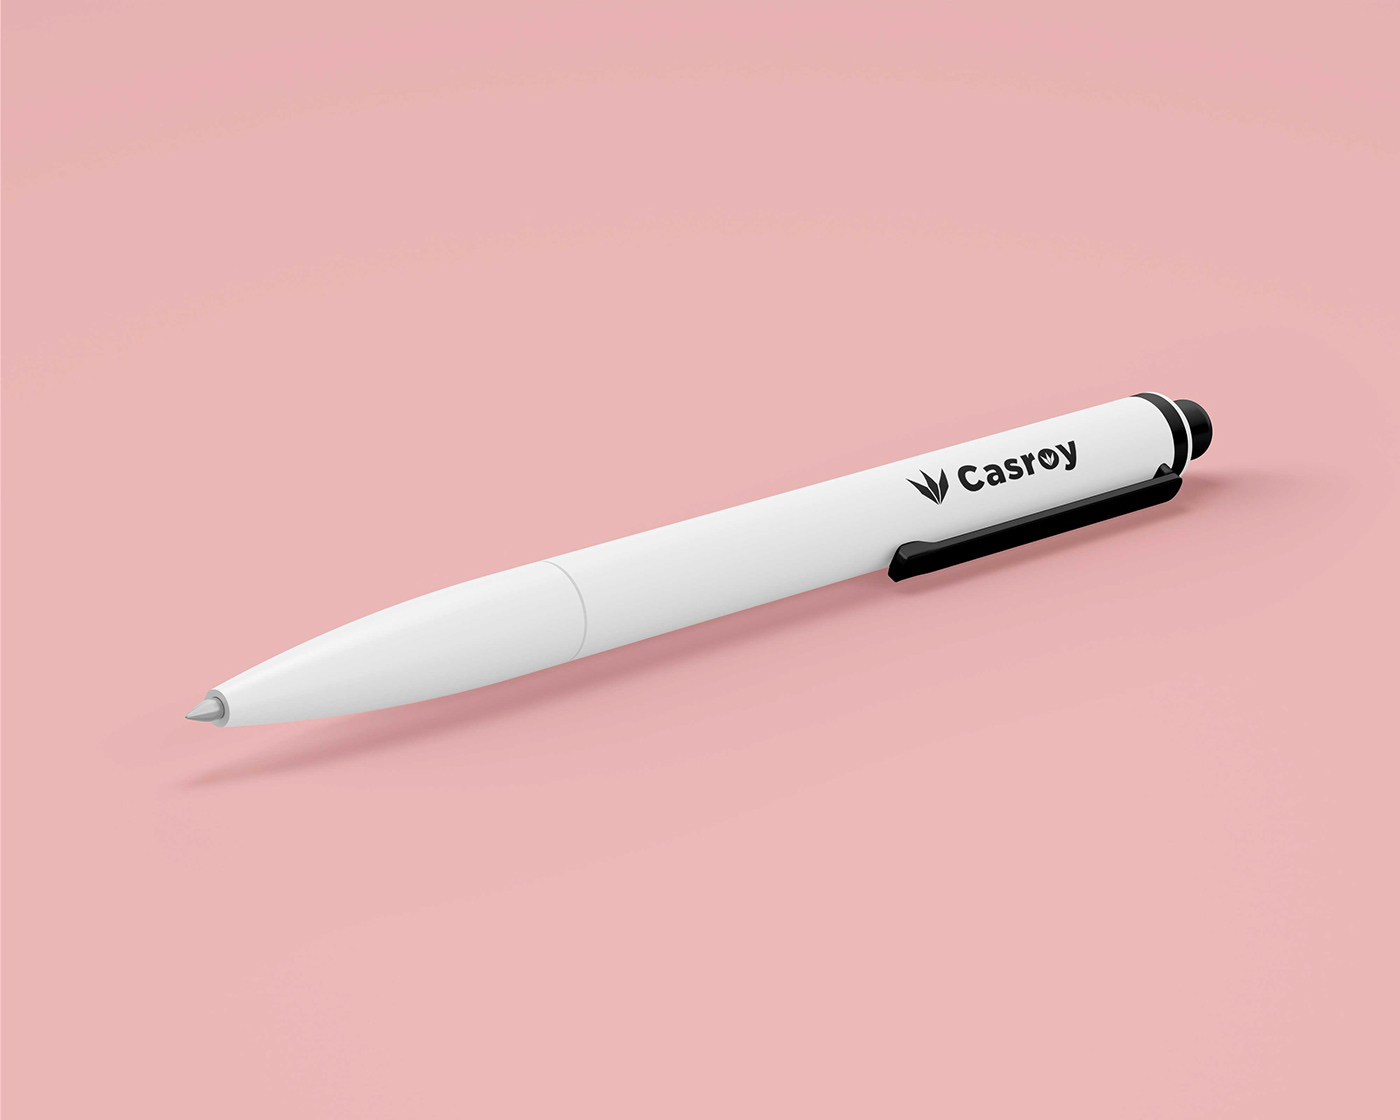 Image contains: Branded pen design representing Casroy by Humza DZN.